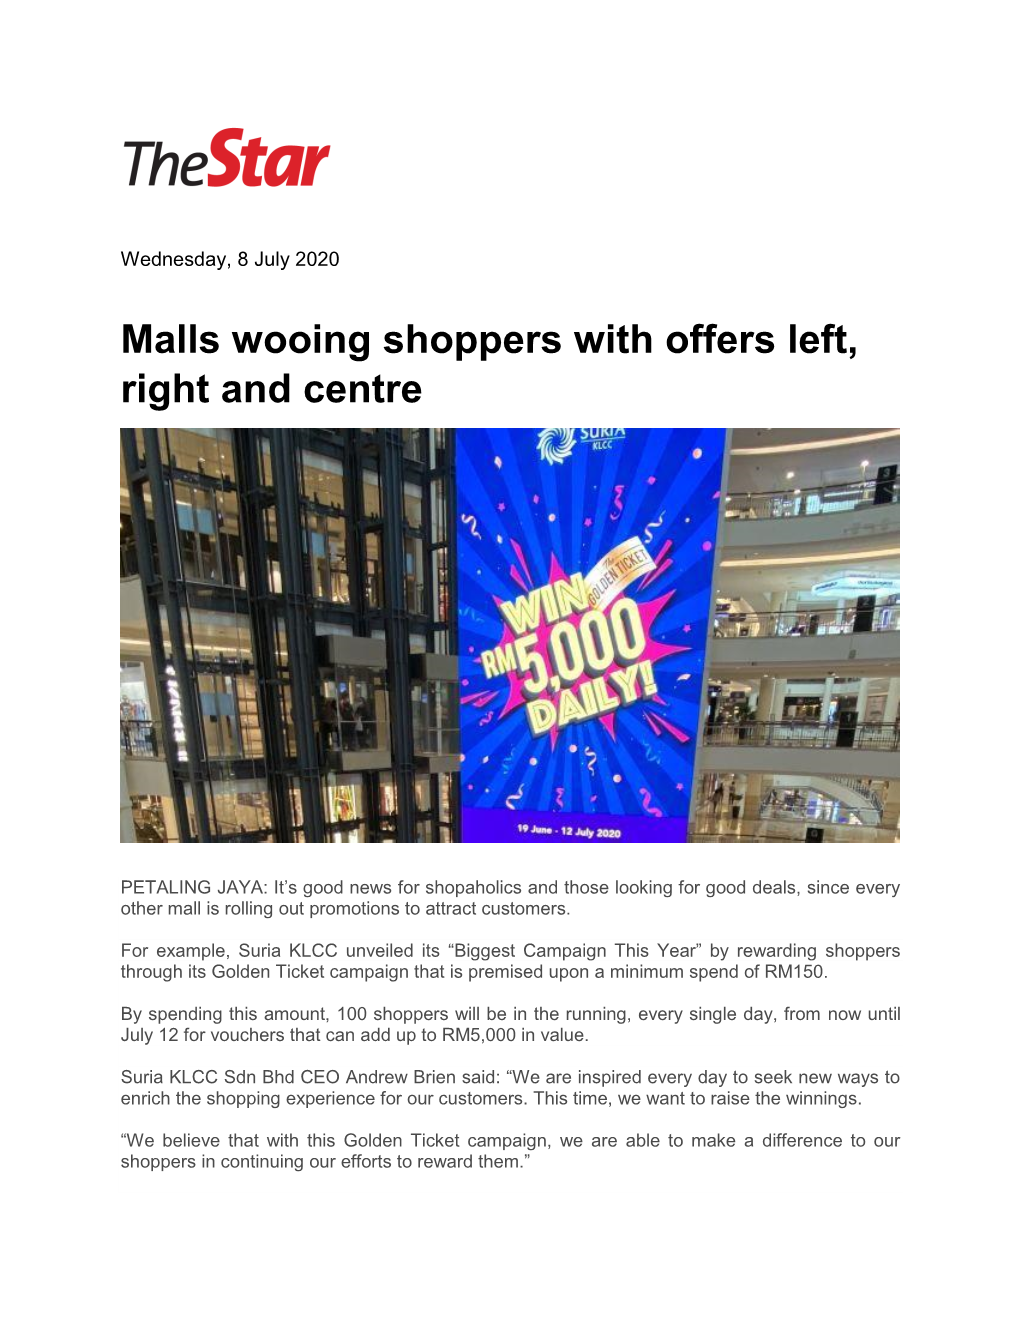 Malls Wooing Shoppers with Offers Left, Right and Centre